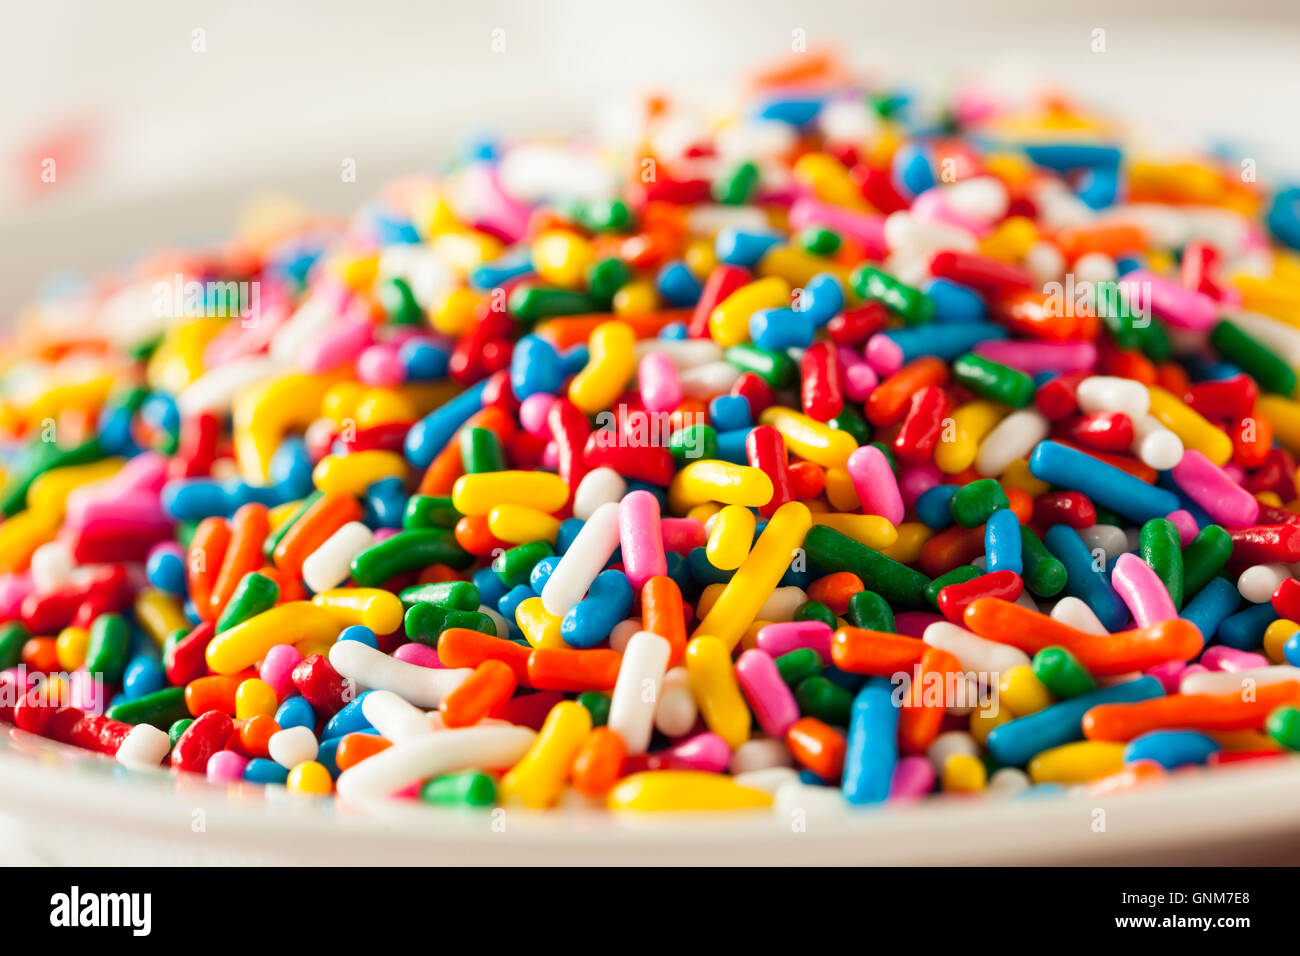 Bright Colored Rainbow Sprinkles in a Bowl Stock Photo